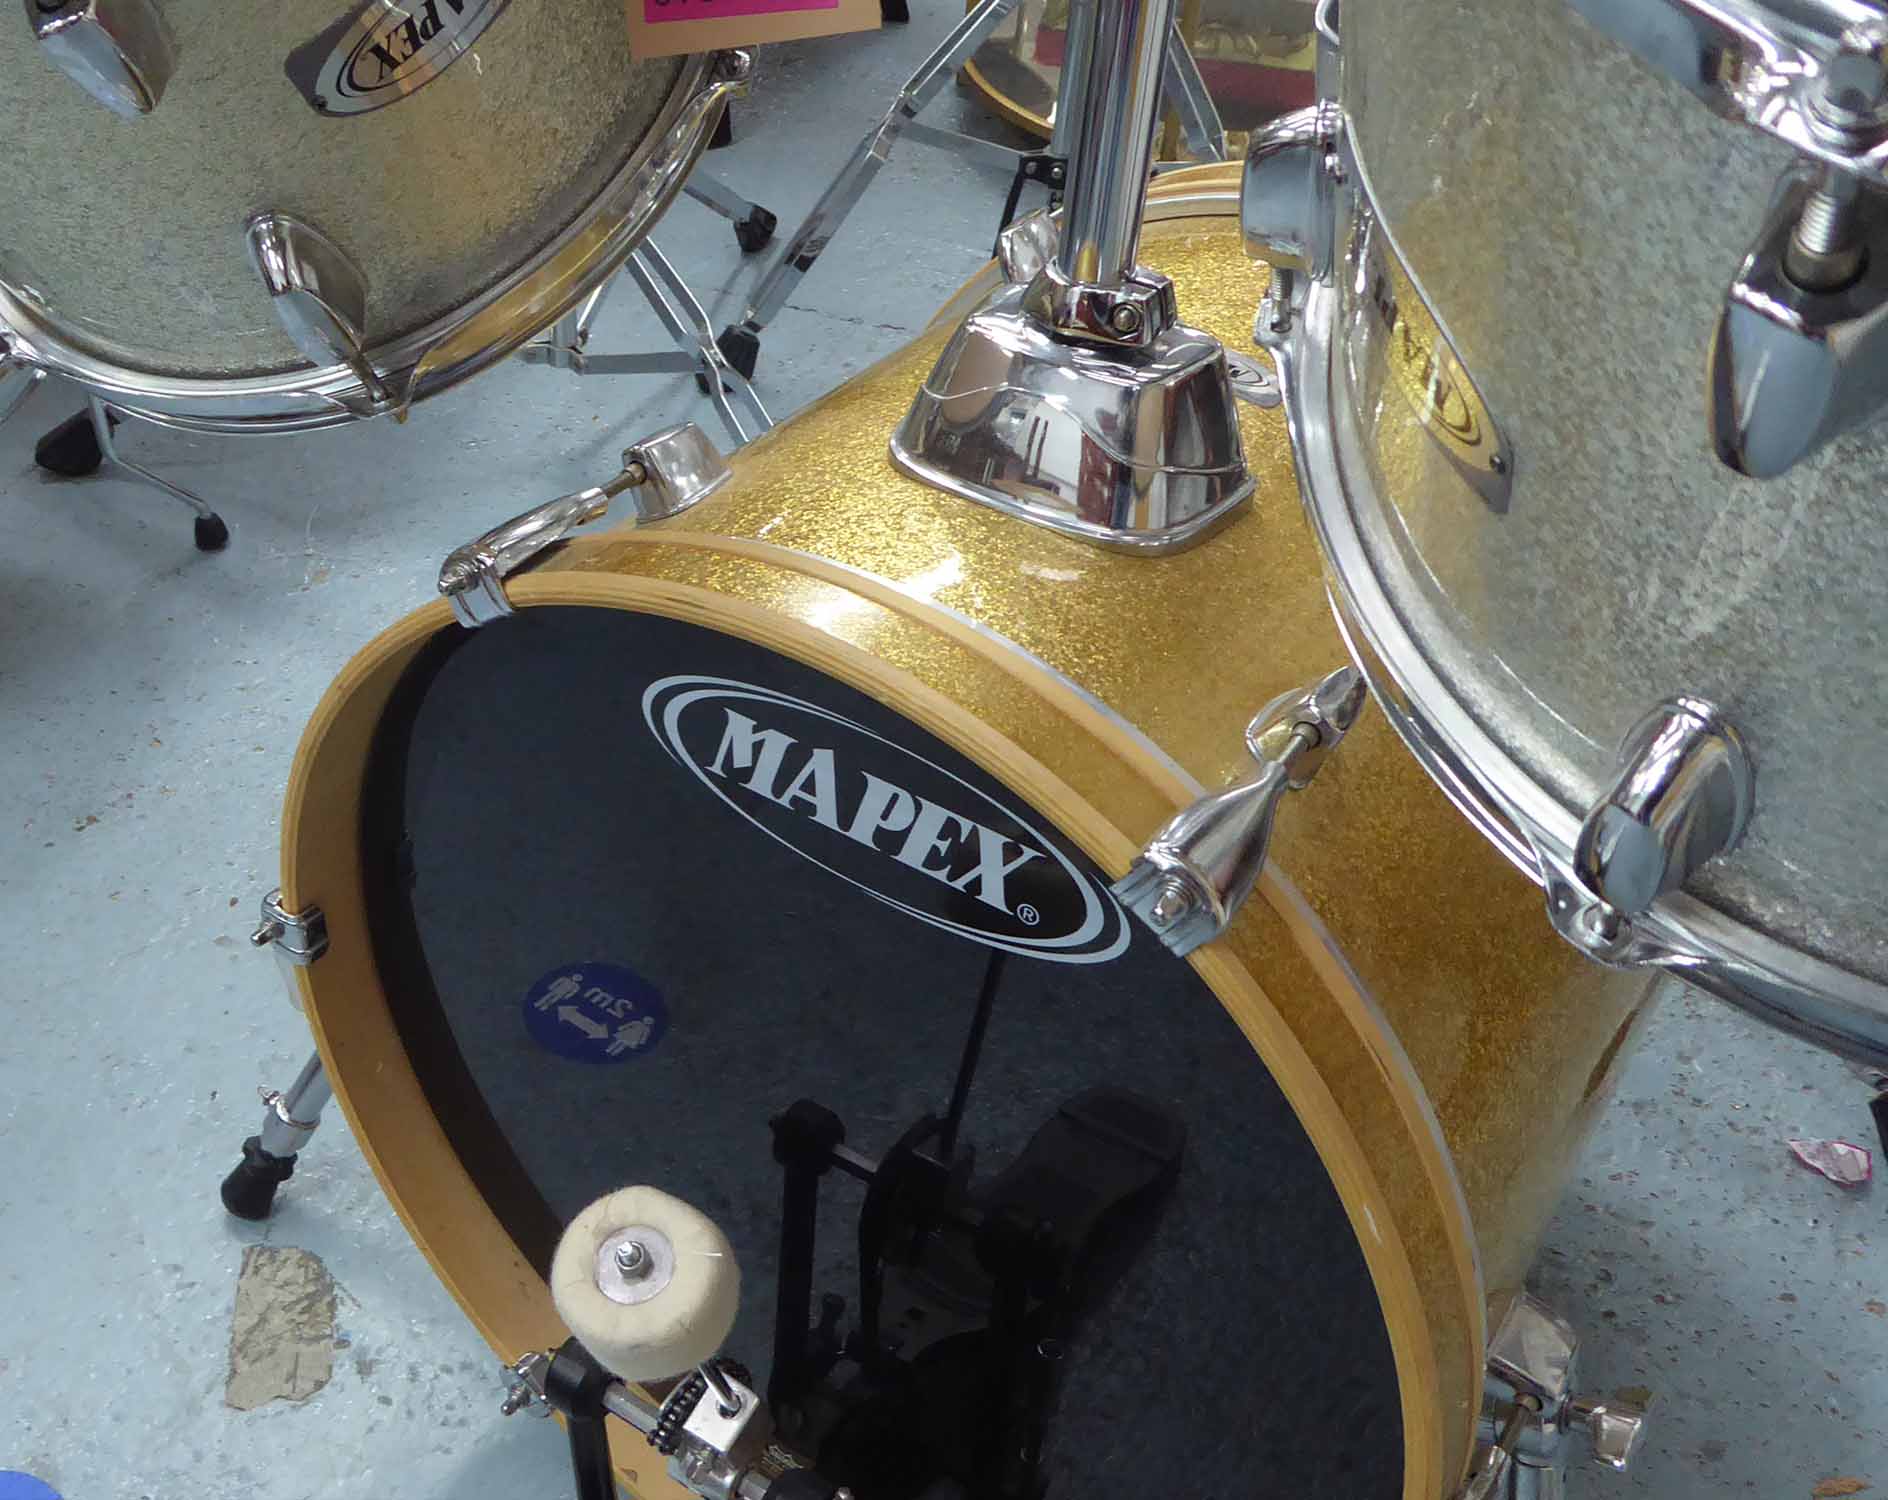 MAPEX DRUM KIT AND STOOL, with various drums and cymbols, 114cm H. - Image 2 of 3